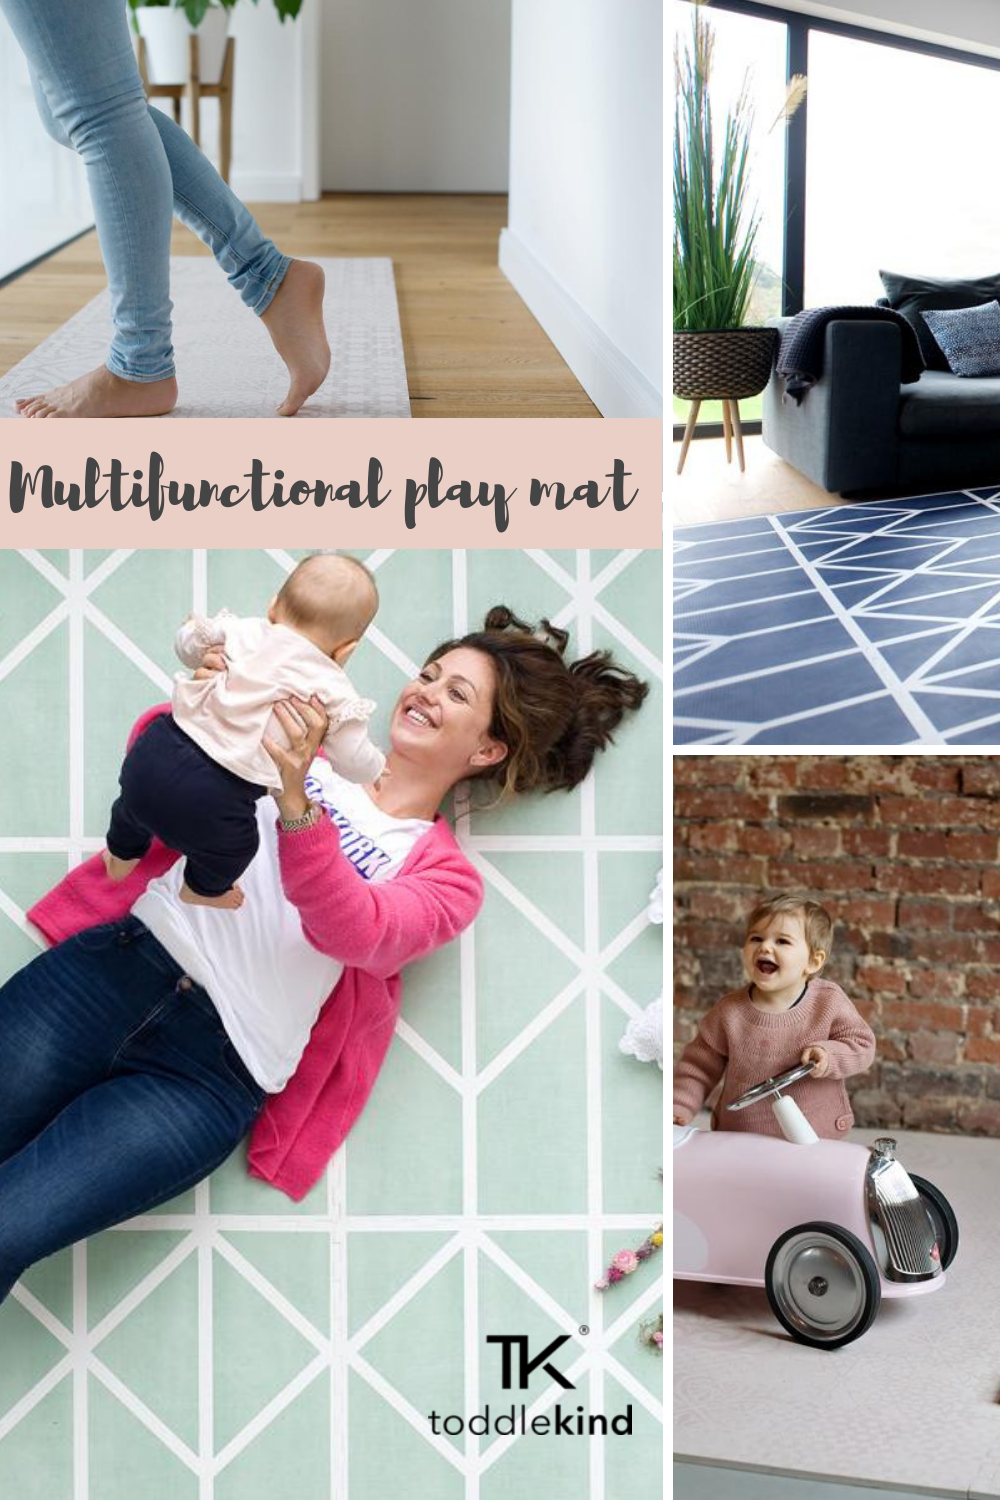 Toddlekind's multifunctional baby and toddler playmat that grows with your family